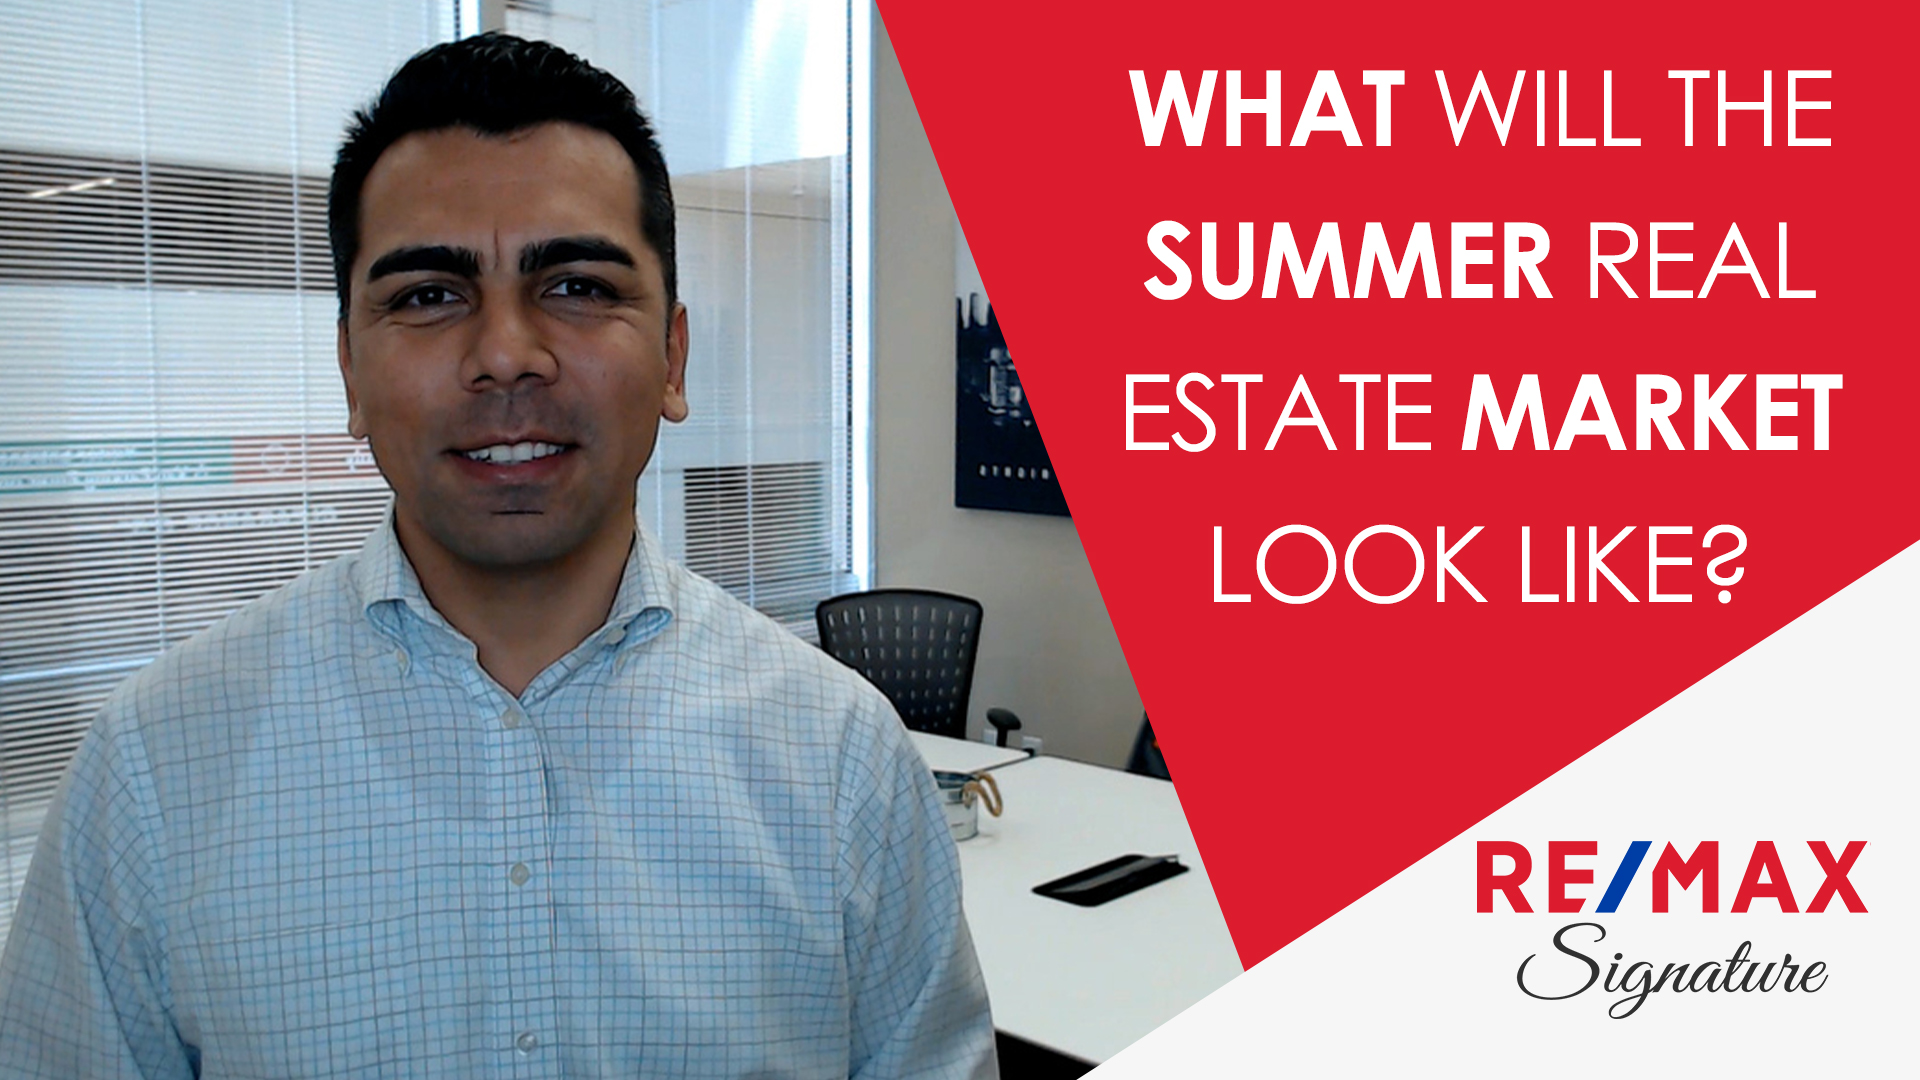 Q: What Can We Expect for Real Estate in Summer 2020?